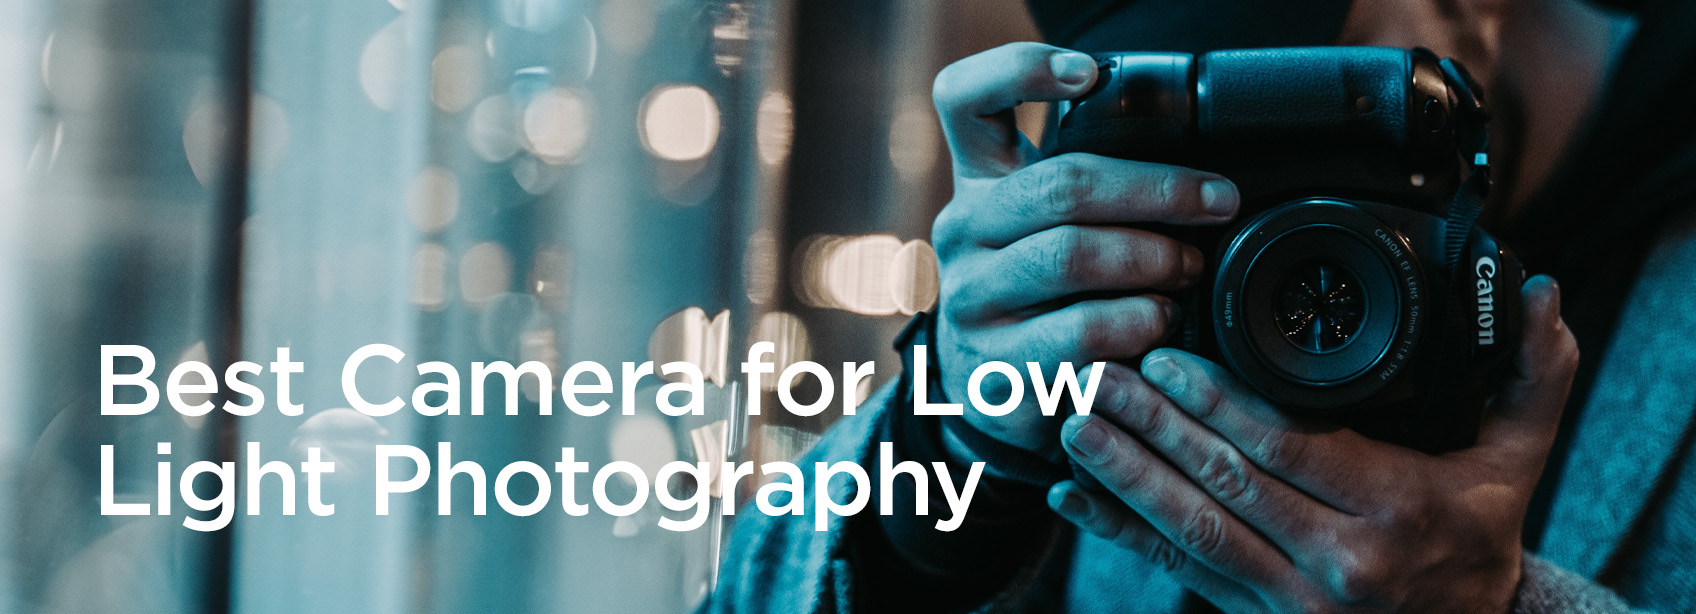 best camera for low light photography